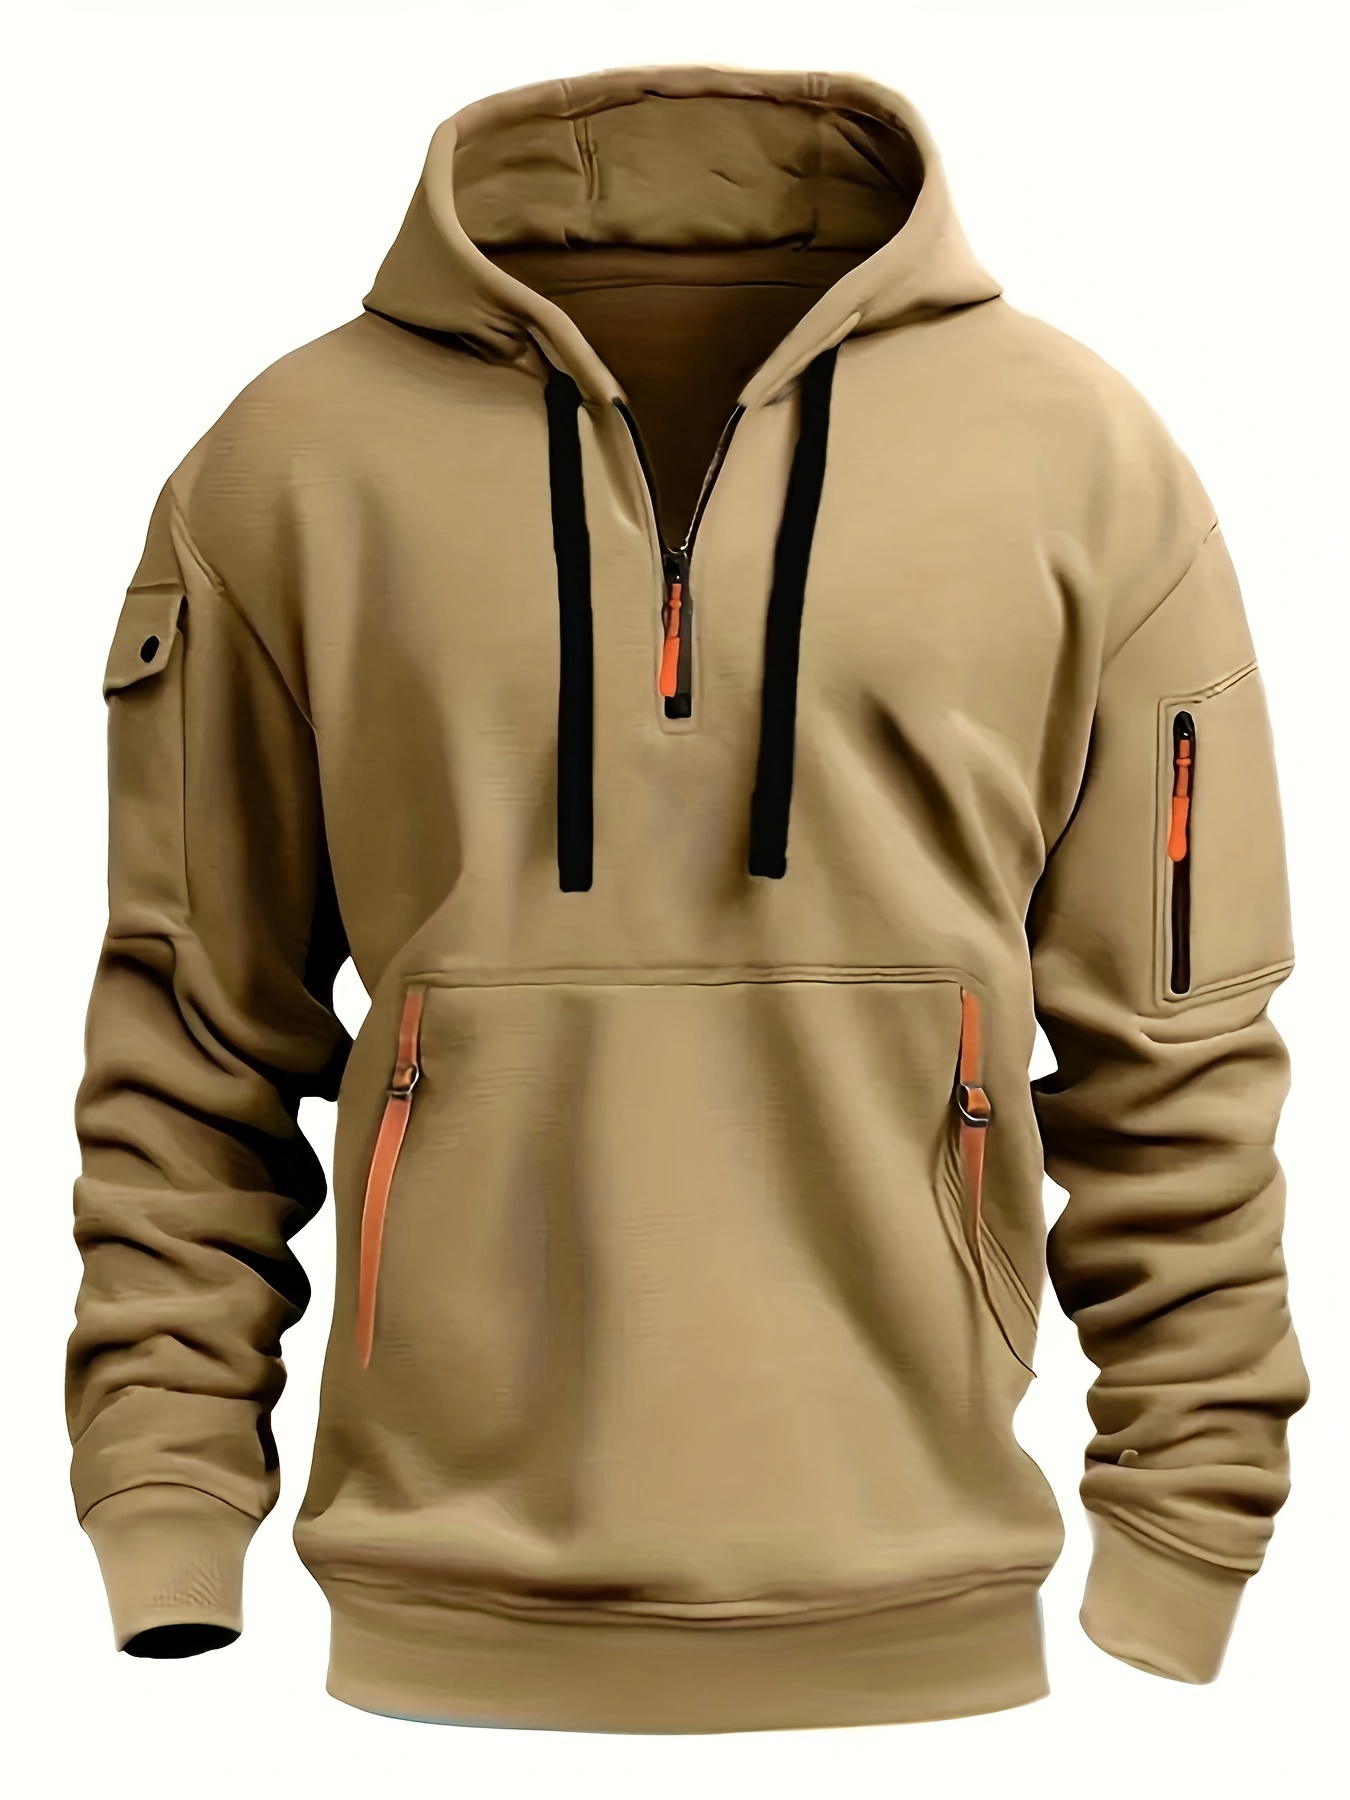 mens fashion half zipped sports hoodie with pockets casual athletic pullover comfortable fit sweatshirt with hood details 10